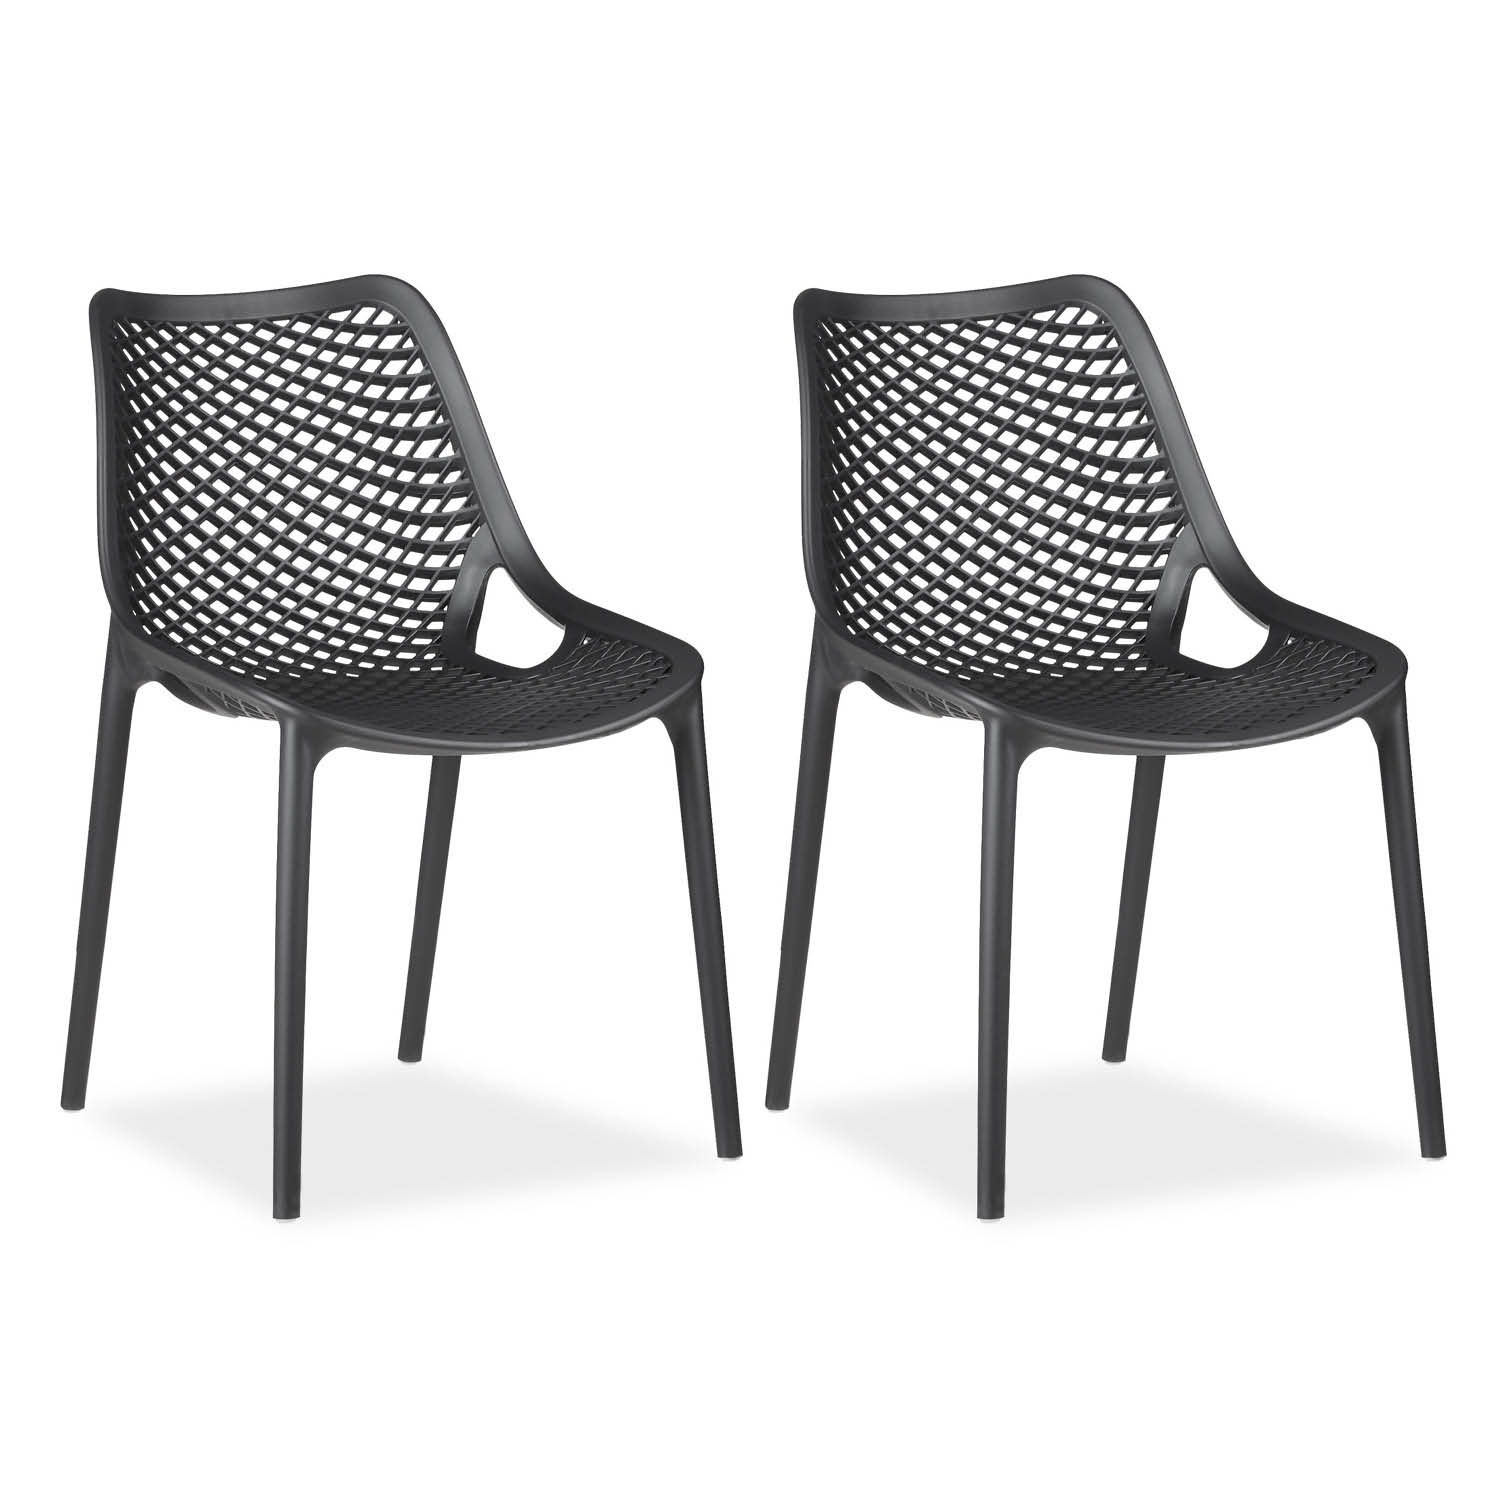 Garden chair Set of 2, 4 or 6 Camping chairs Black Grey Outdoor chairs Plastic Egg chair Lounger chairs Stacking chairs